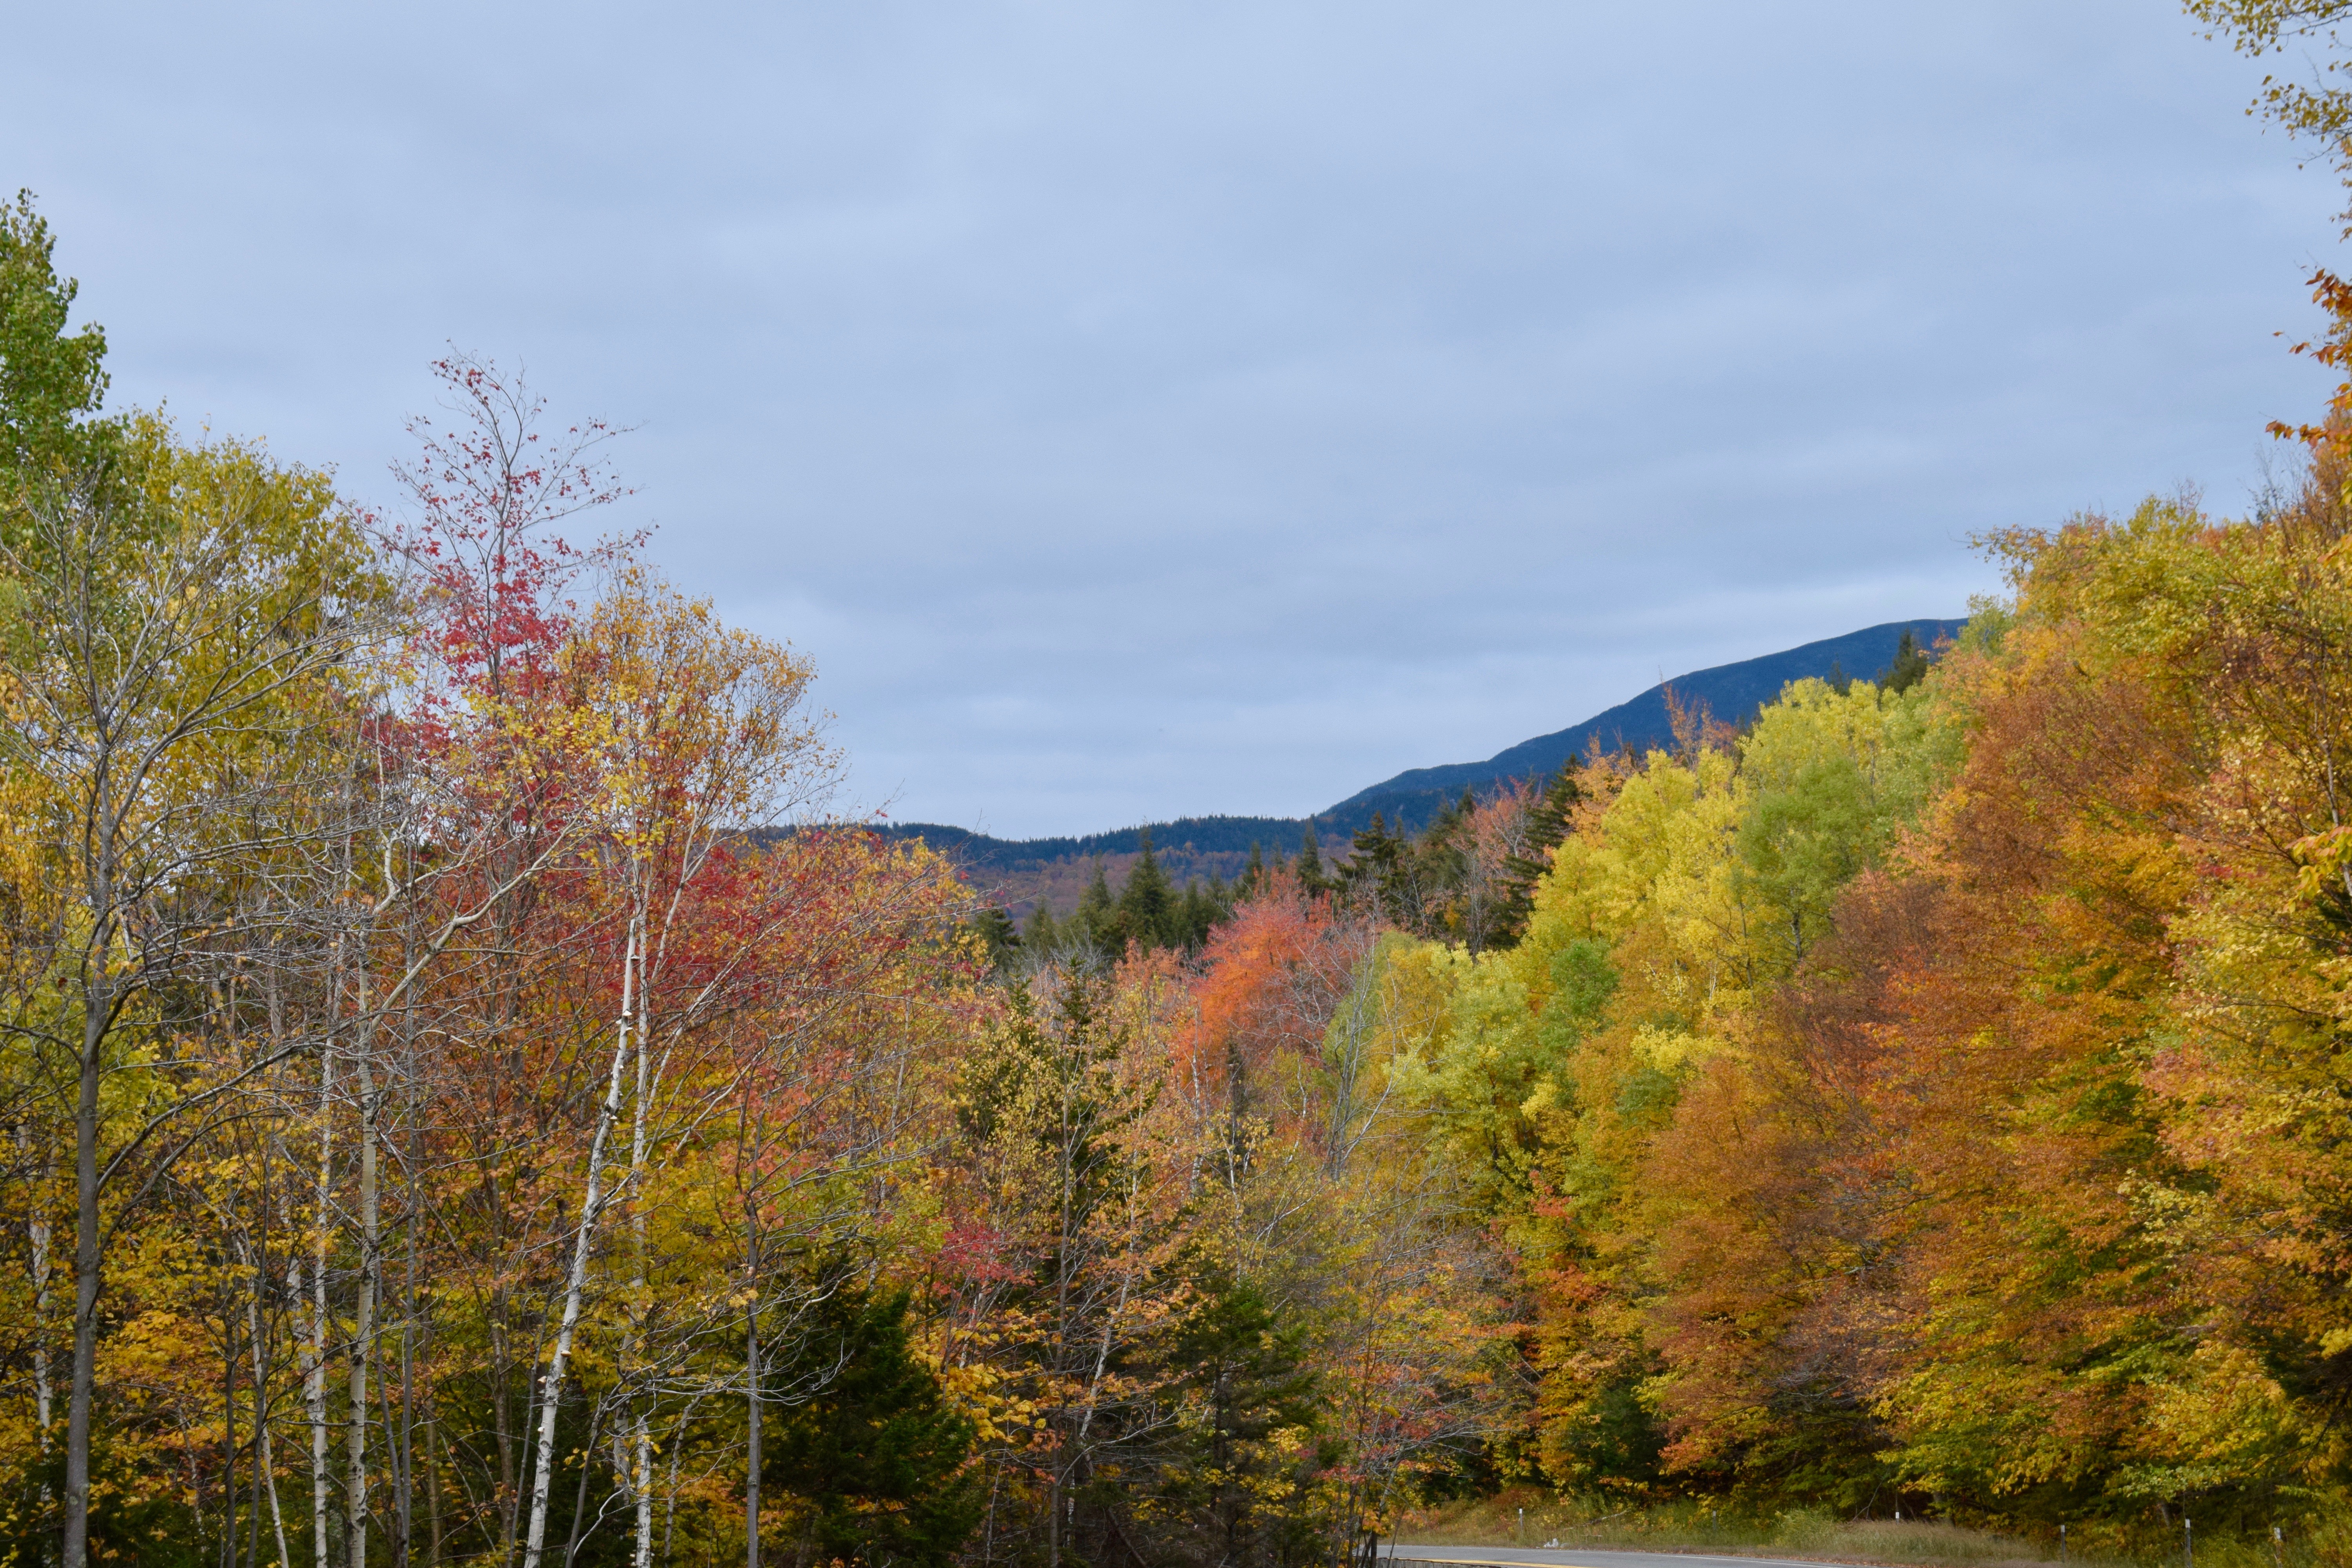 Birch and Other Trees with Their Colorful Foliage